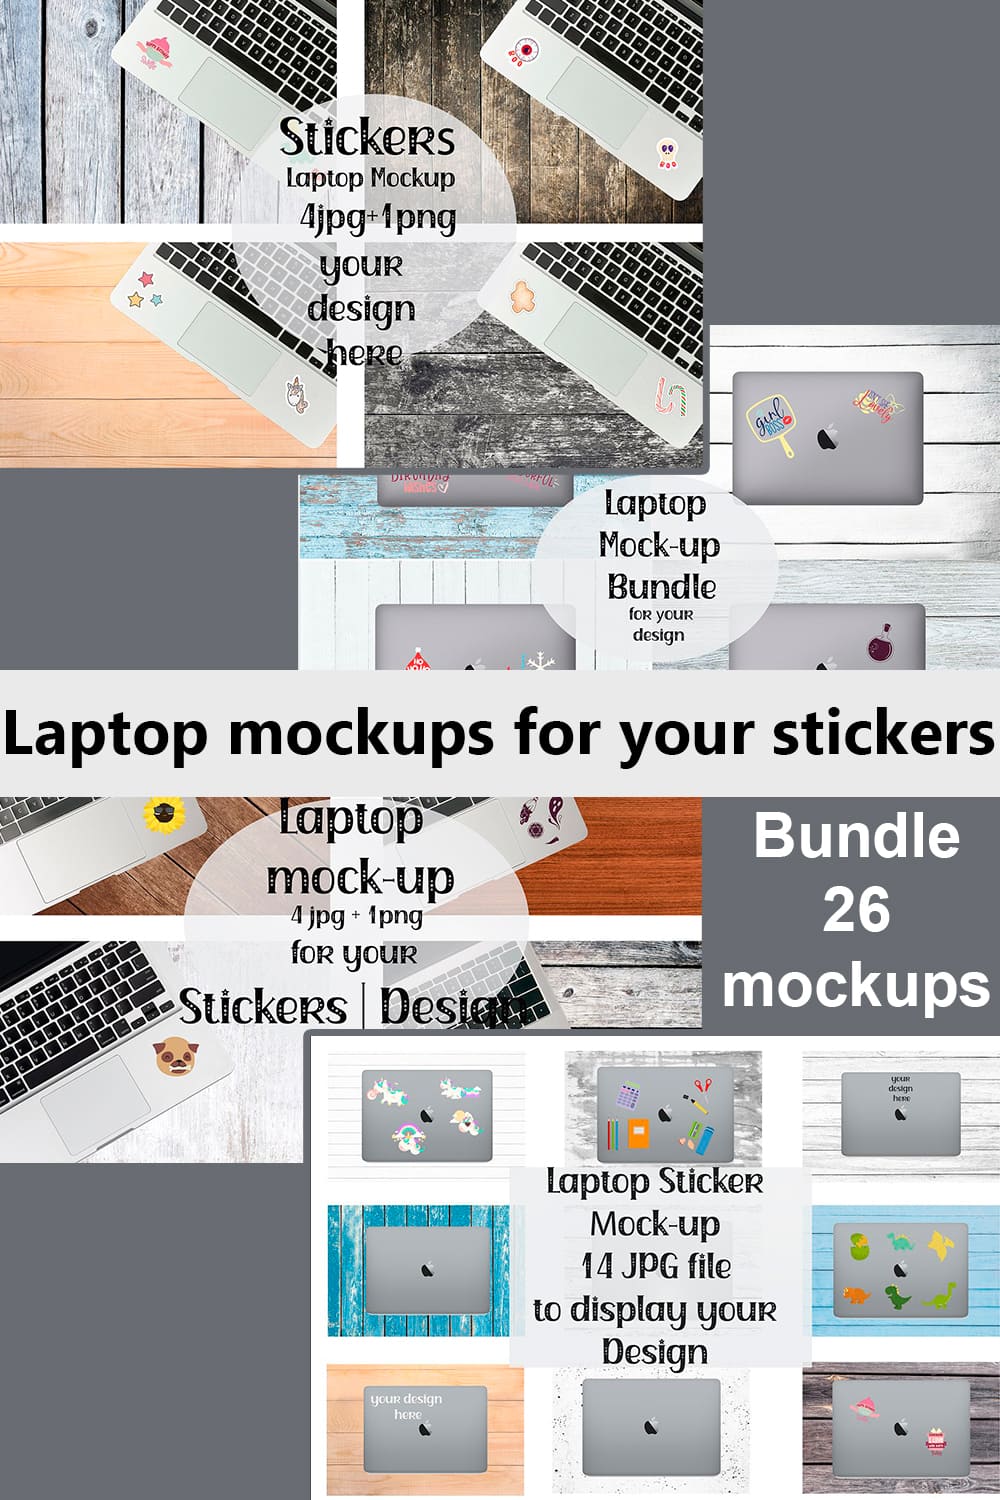 Set of images of laptops with enchanting stickers.